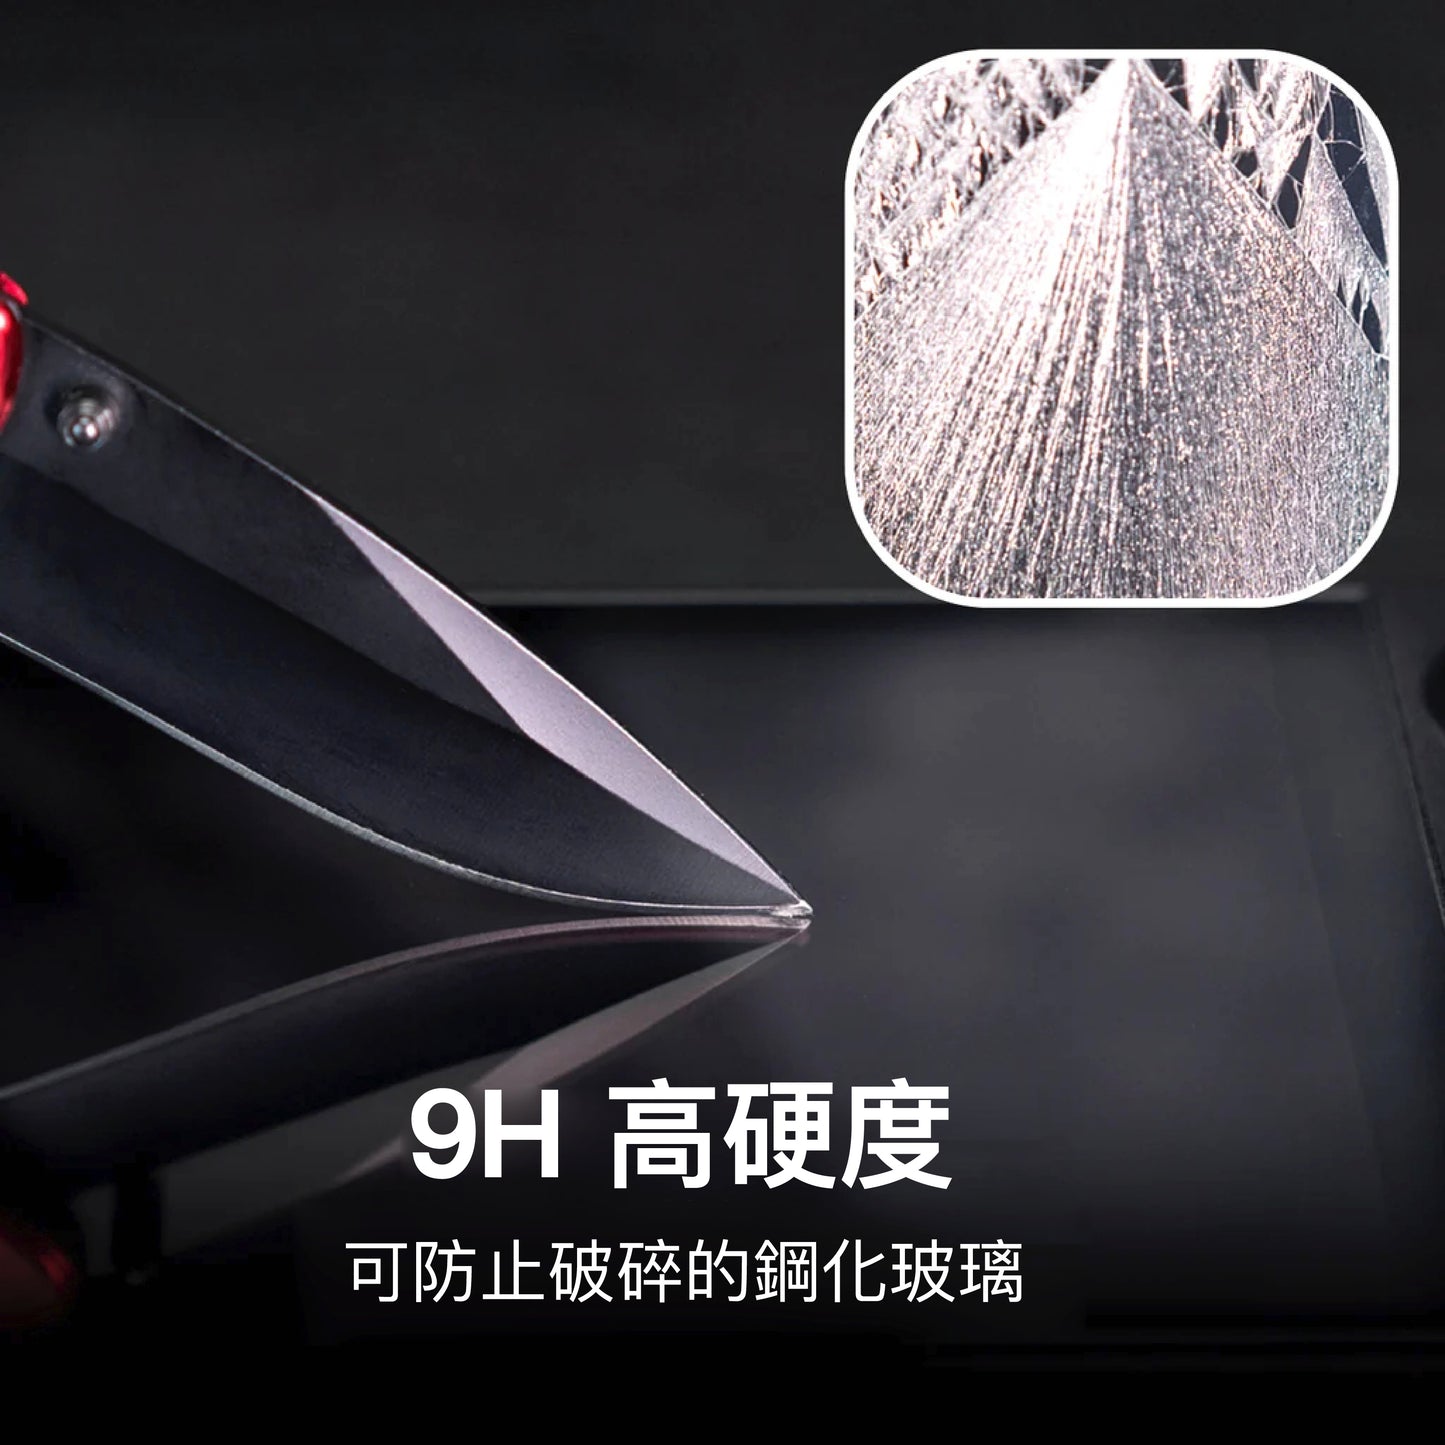 9H tempered glass protector pack of two for Steam Deck 